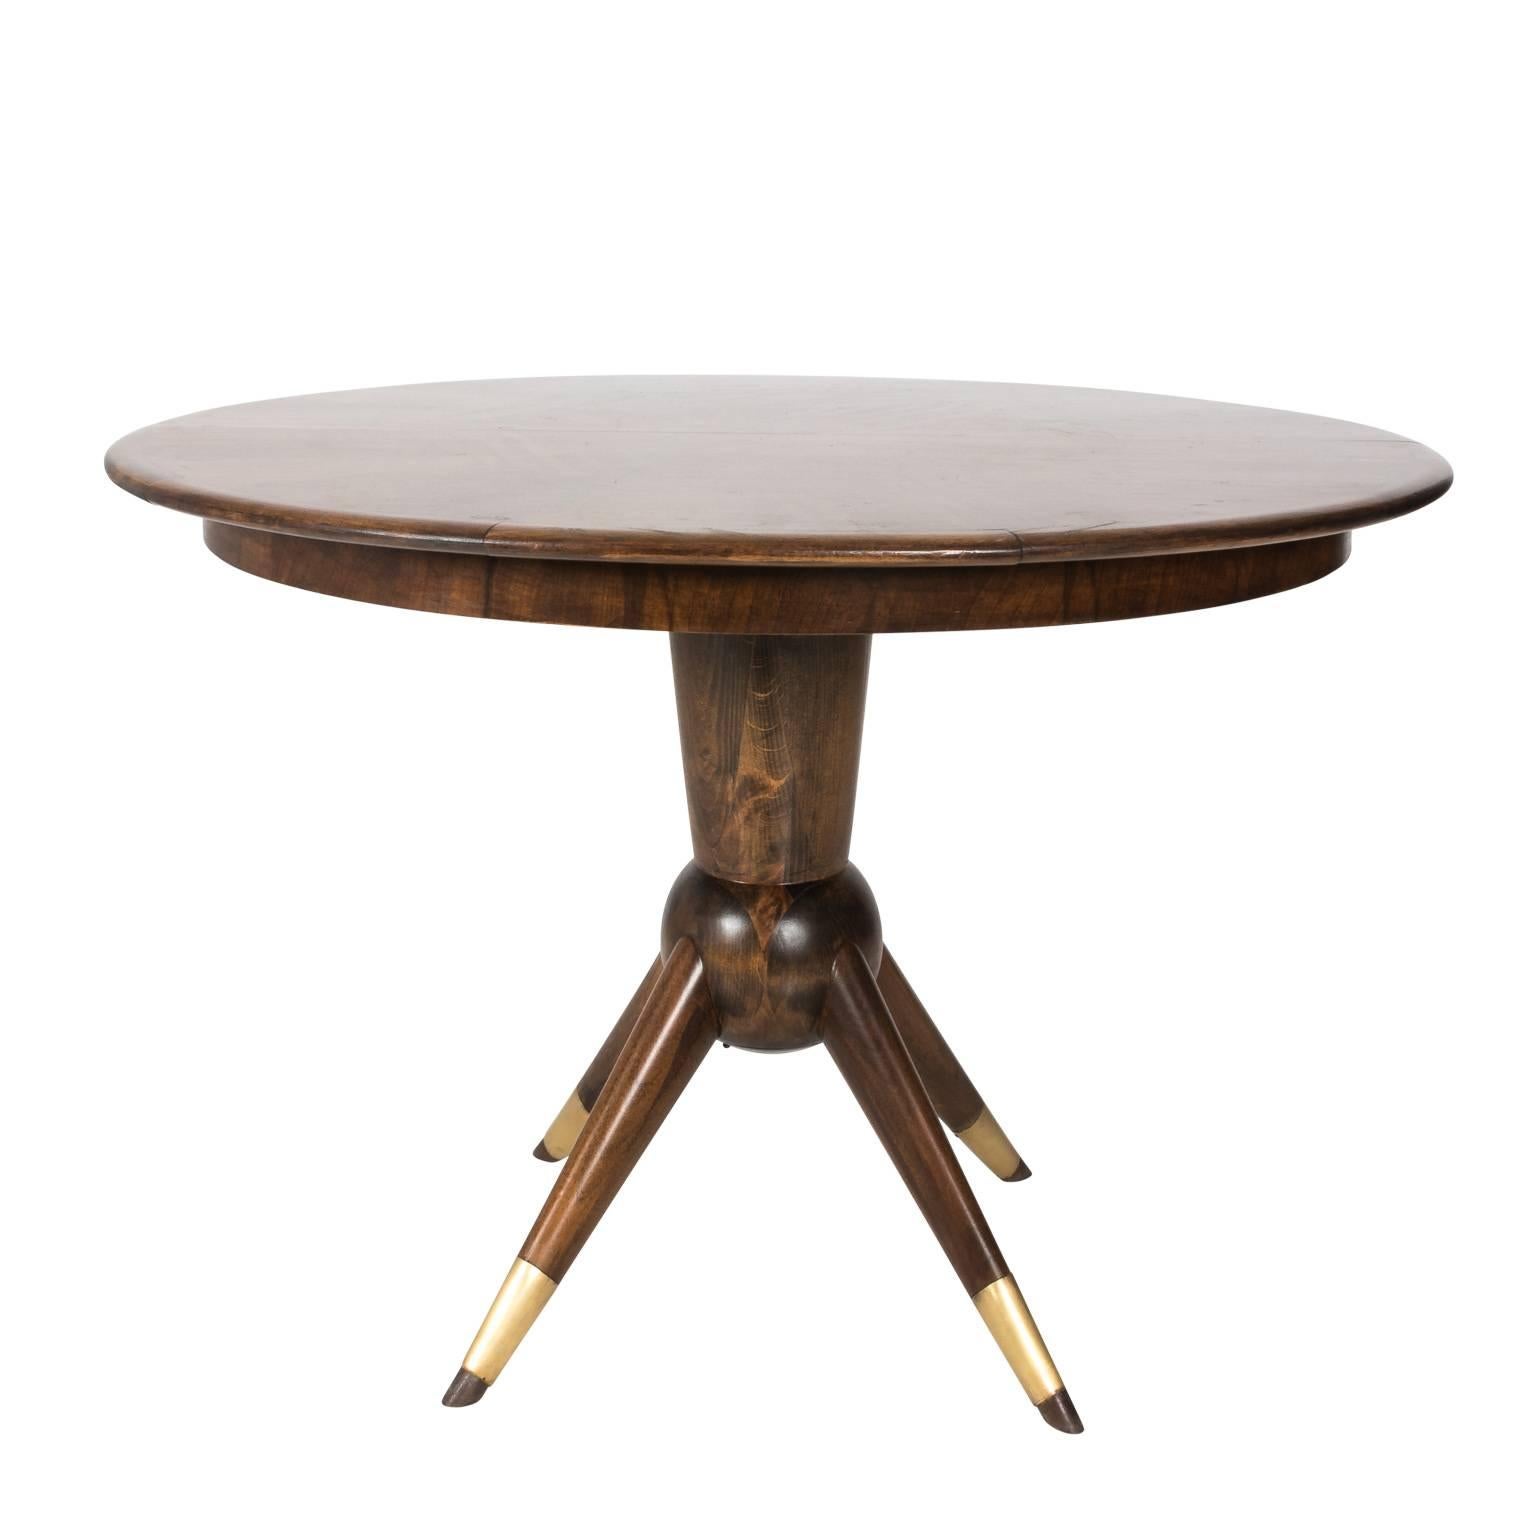 Mid-Century Modern teak wood adjustable oval/round dinging table on four legged pedestal with brass bands. This table folds to a round pedestal table that measures 46